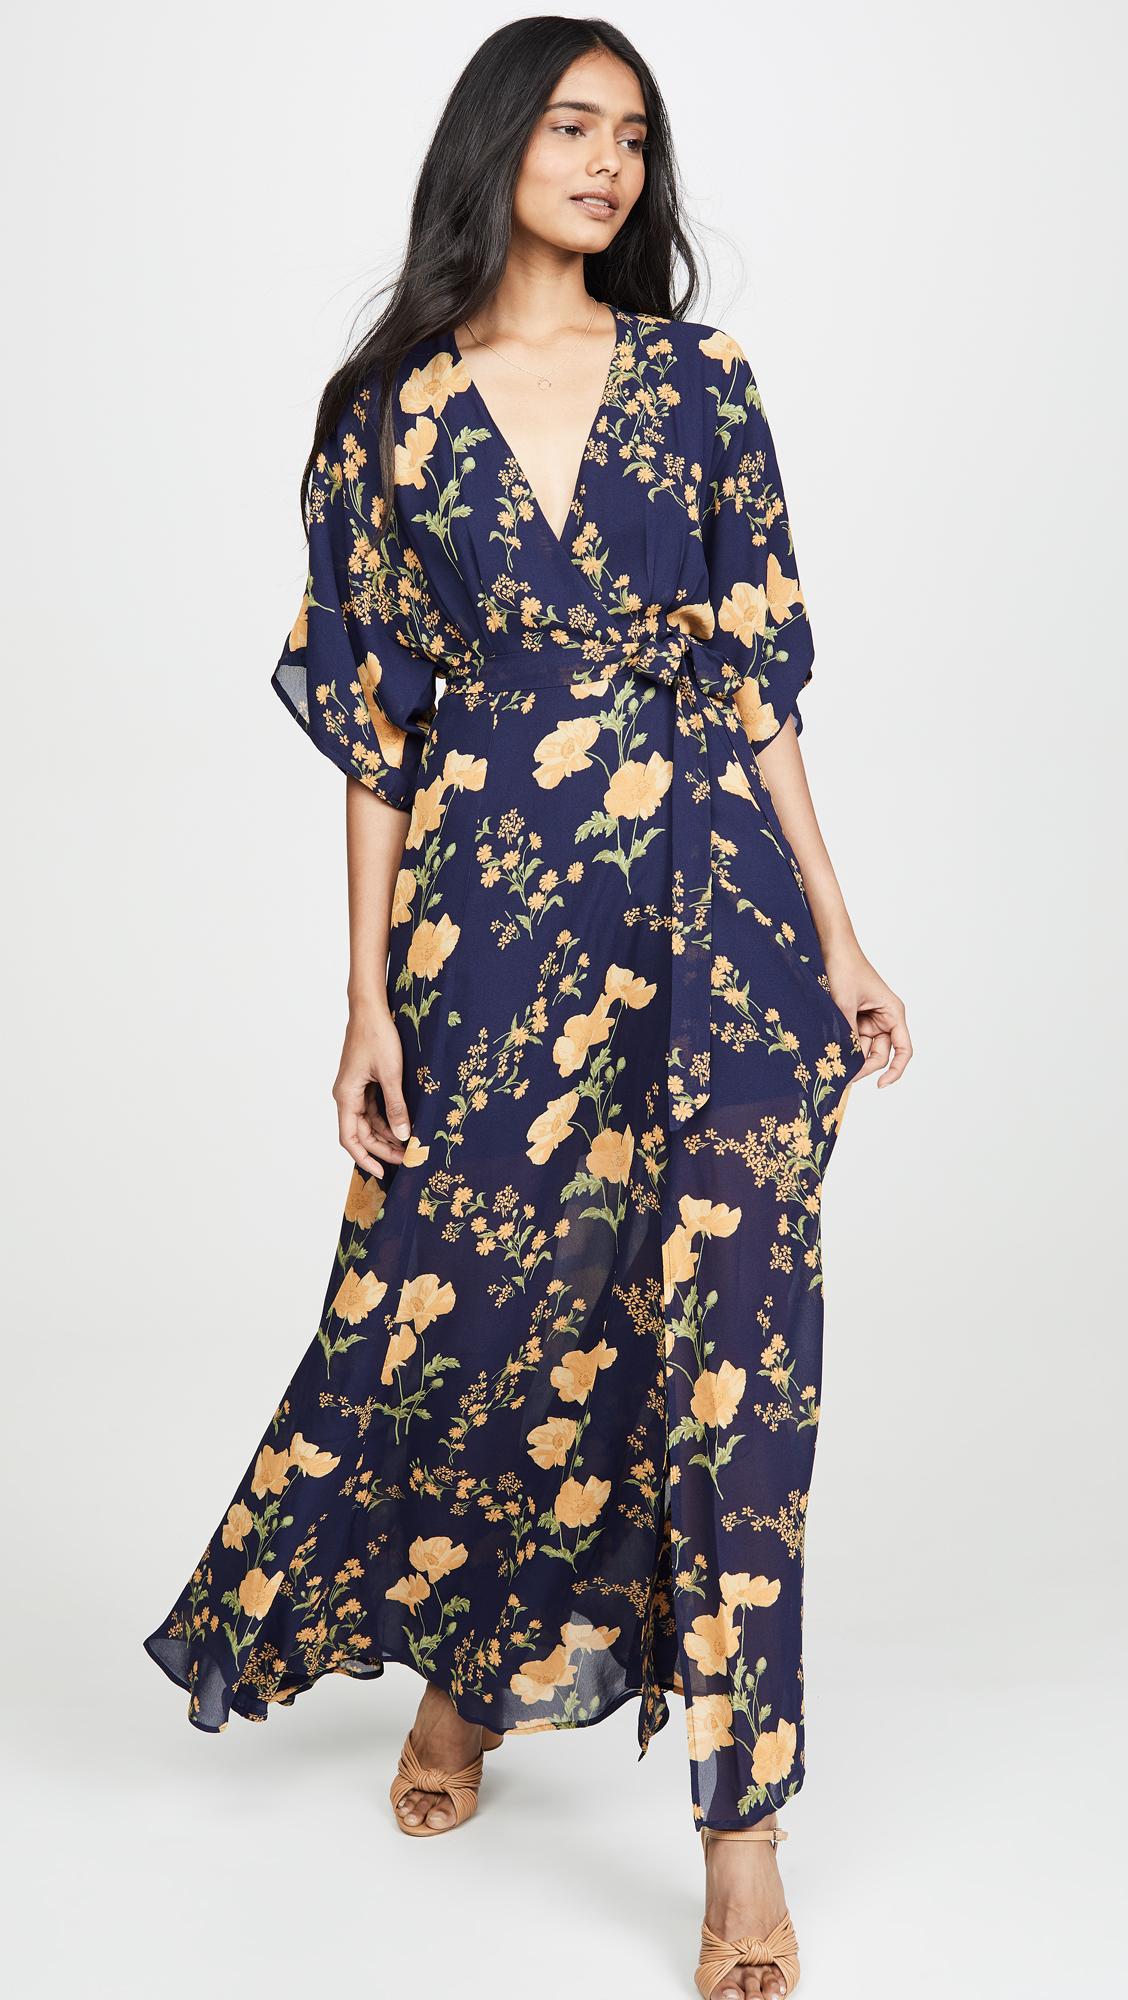 Reformation Synthetic Winslow Dress in Blue - Lyst